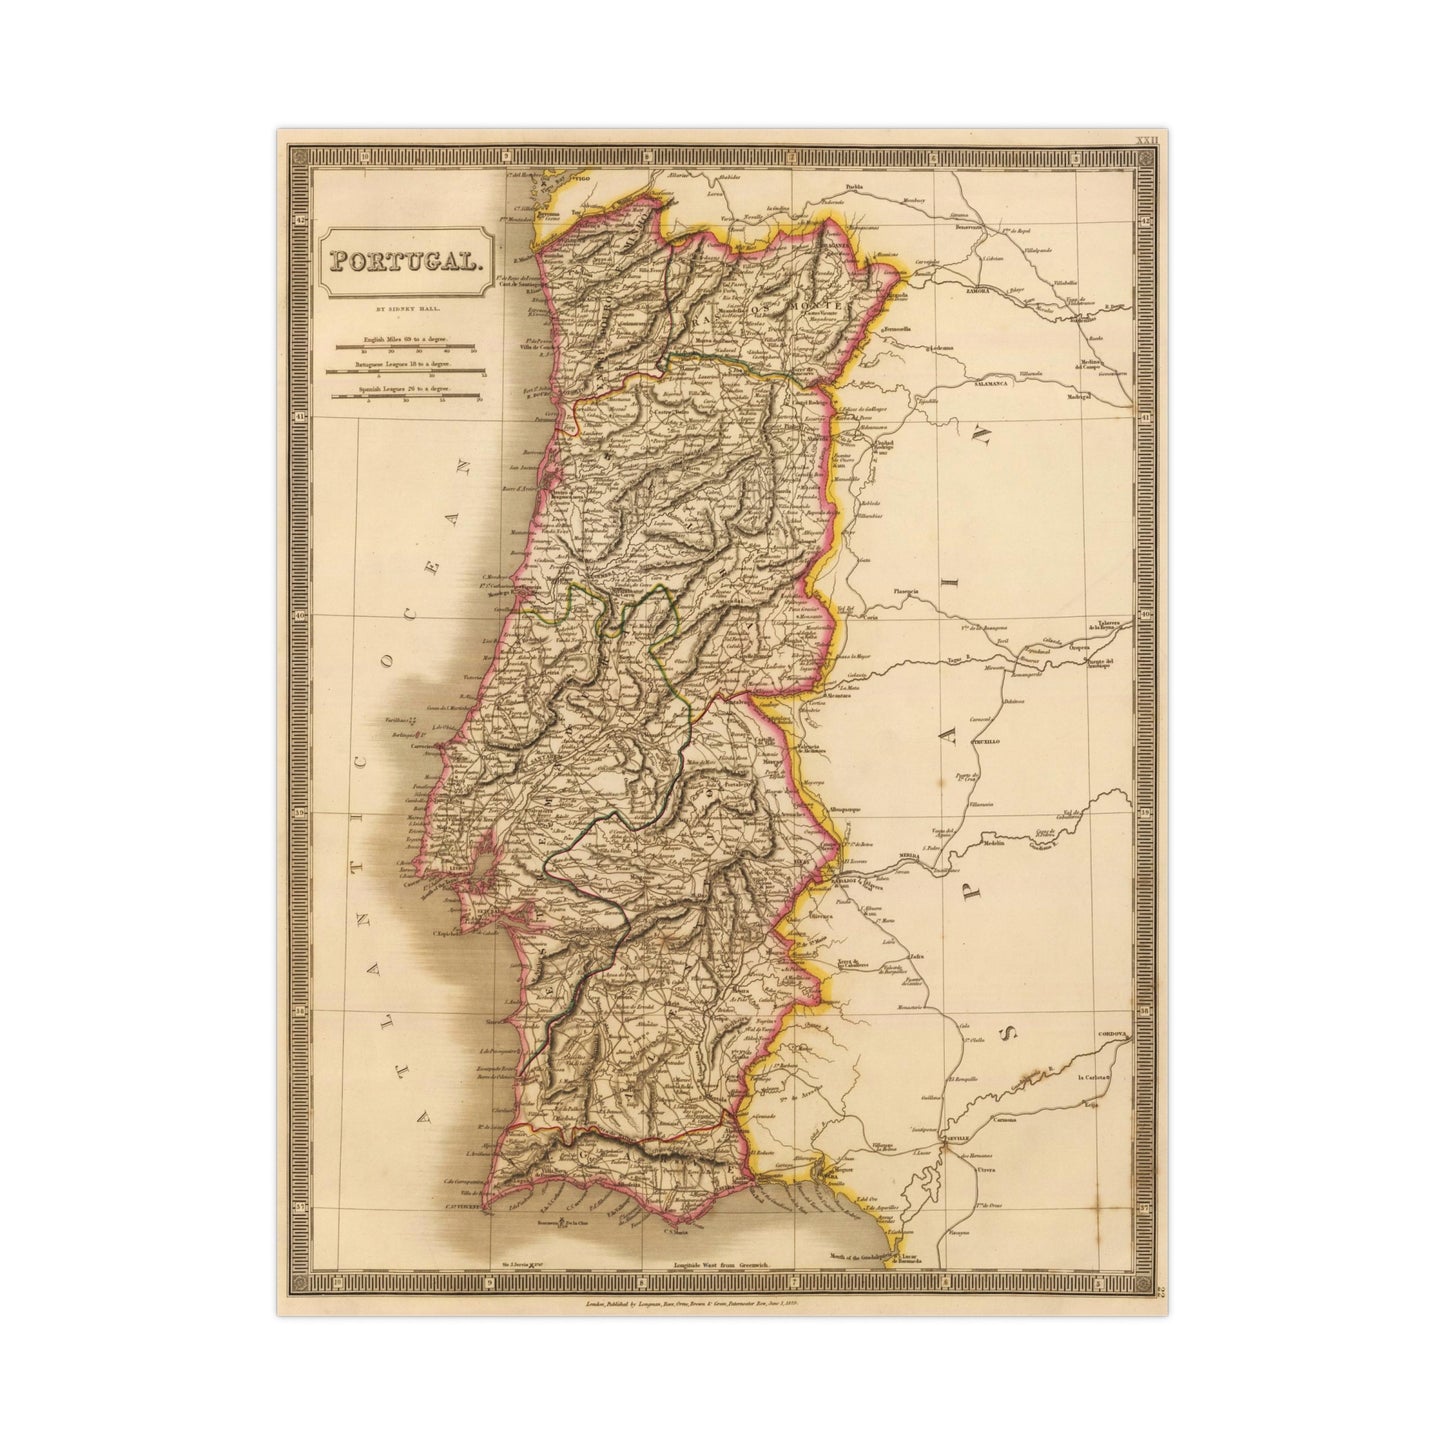 Portugal - 19th Century Map (Museum Paper Print)